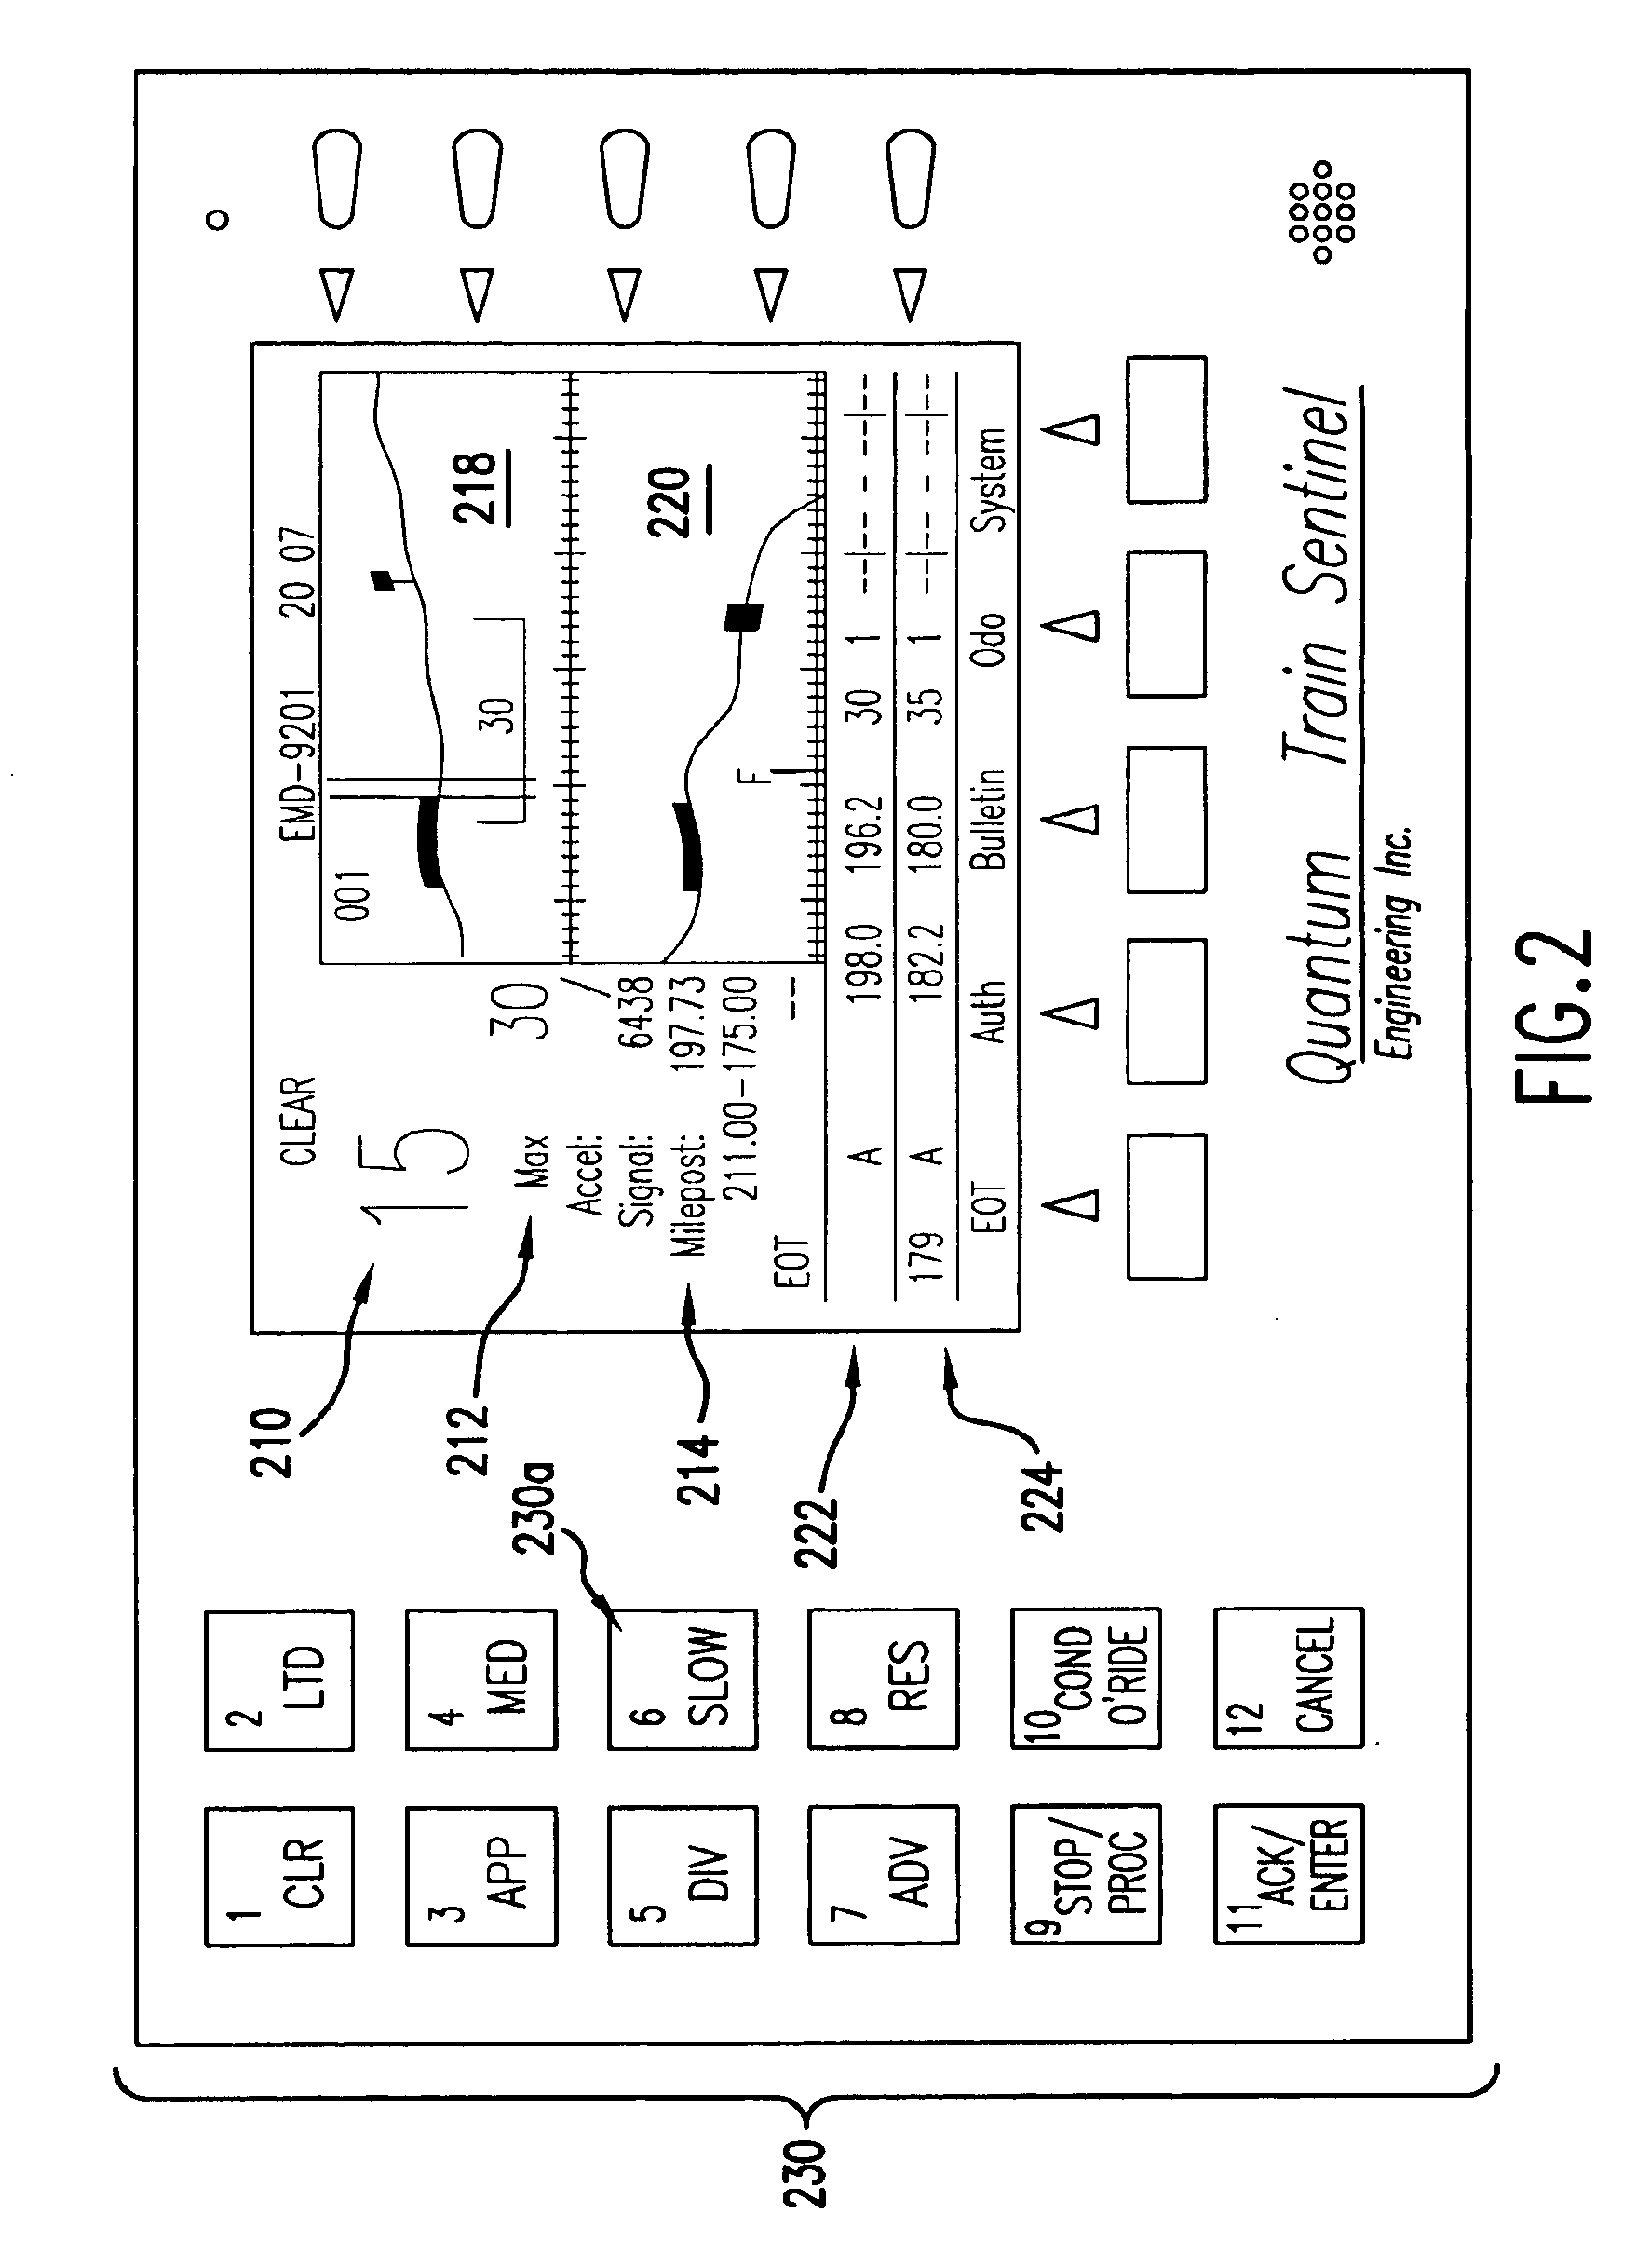 Train control system and method of controlling a train or trains